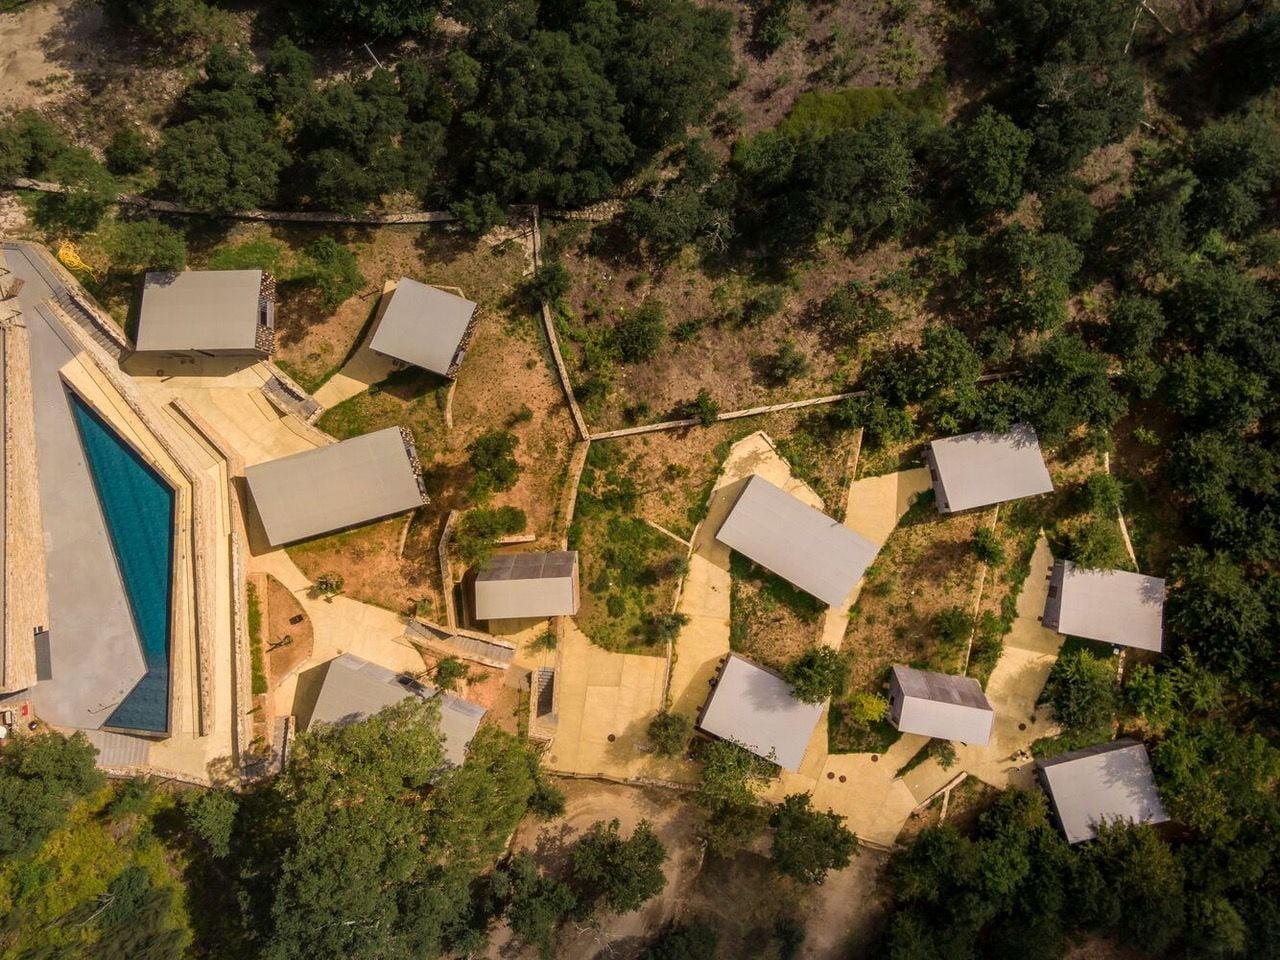 Aerial View of the modular concrete cabins that make up the Paradinha Village Resort.